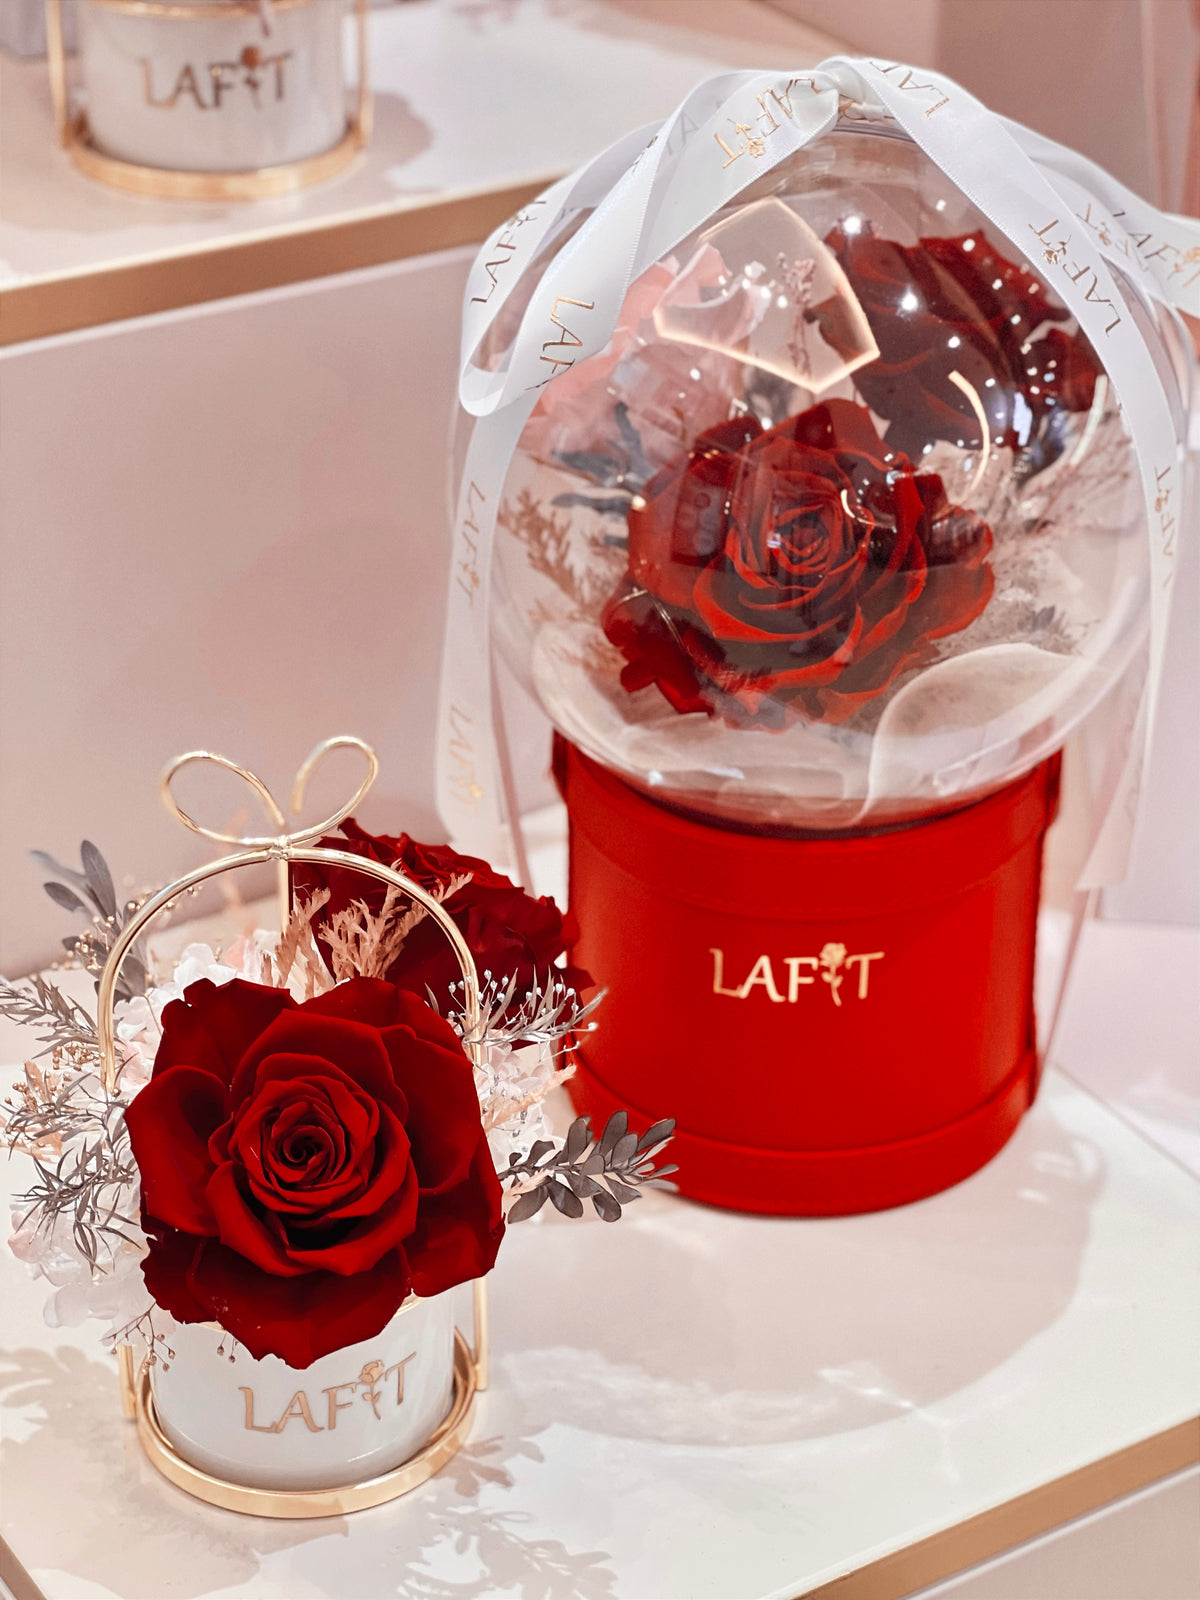 LAFIT 奢華經典永生花藝擺設 · Rose Sparkling Bubble - Deluxe Red